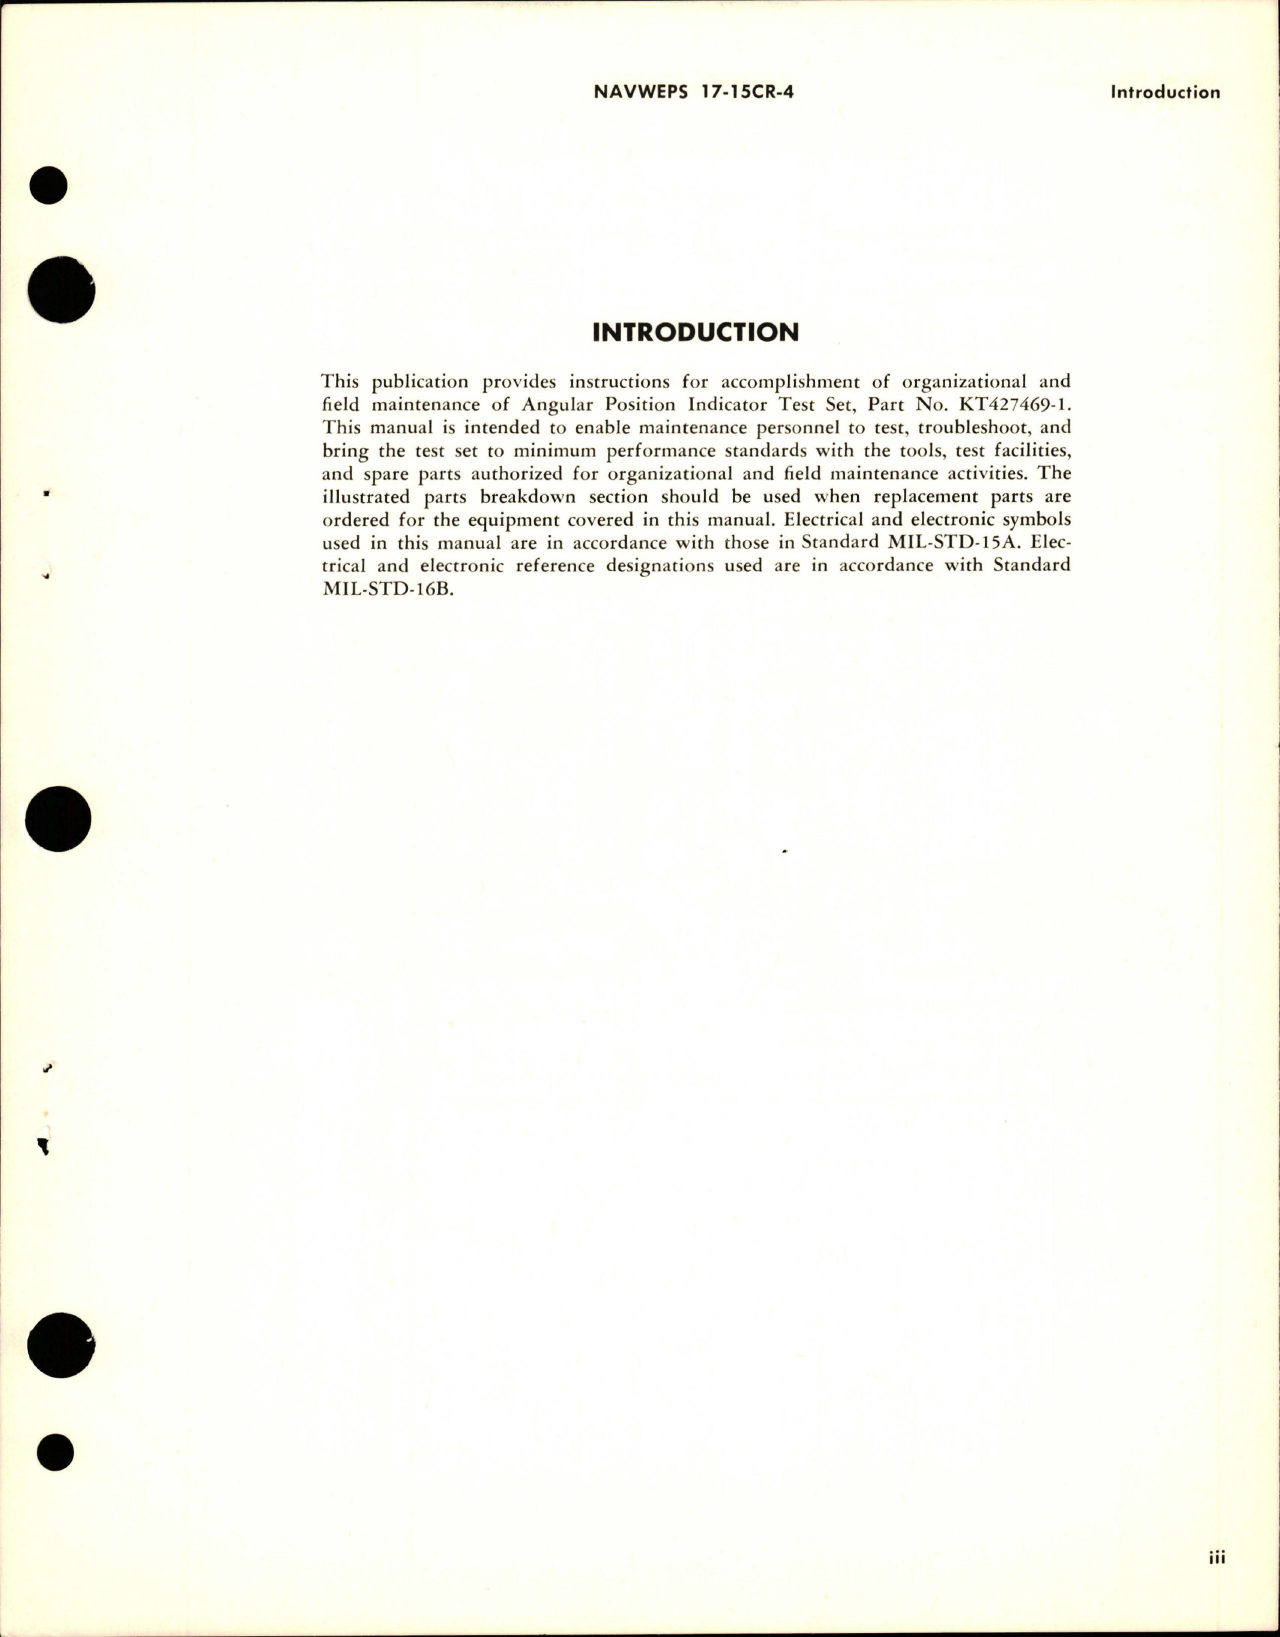 Sample page 5 from AirCorps Library document: Operation and Service Instructions with Illustrated Parts for Angular Position Indicator Test Set - Part KT427469-1